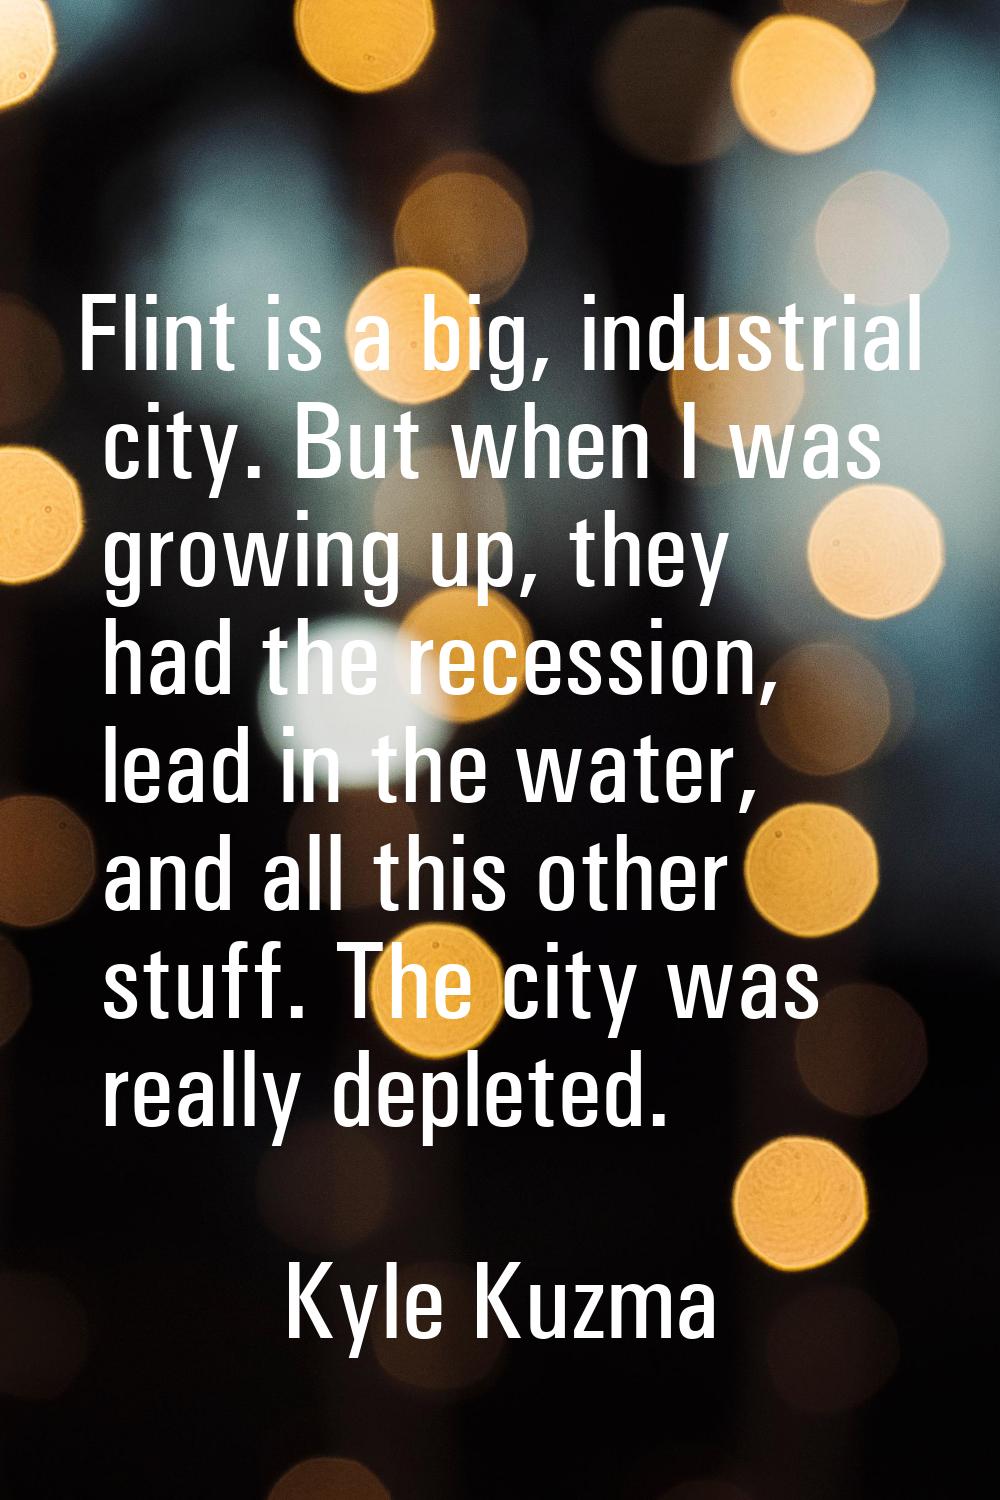 Flint is a big, industrial city. But when I was growing up, they had the recession, lead in the wat